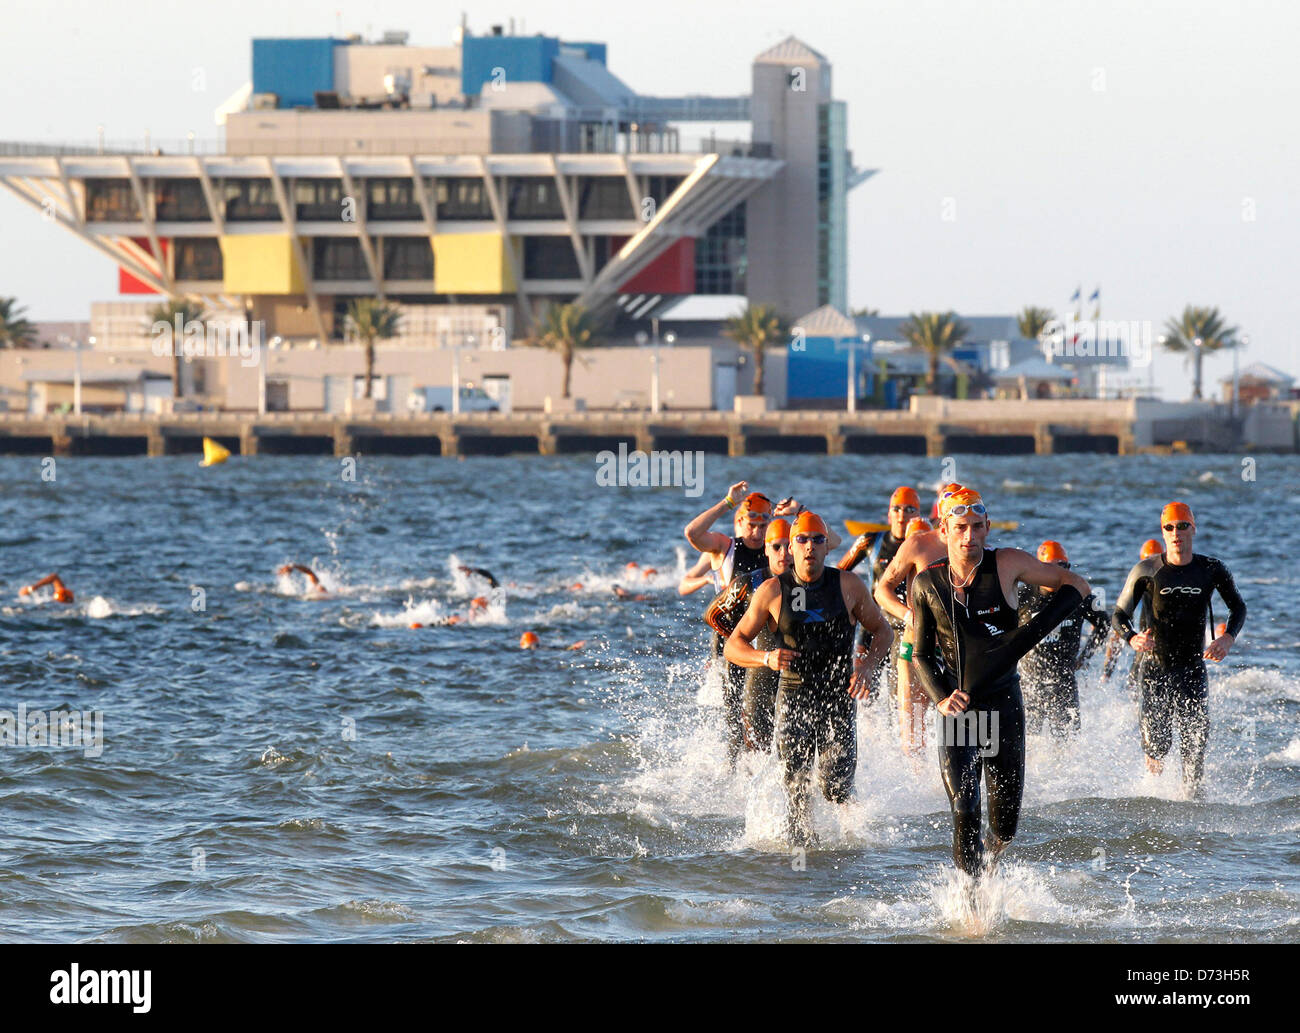 Sunday April 28th 2013. St. Petersburg, Florida, USA JAMES BORCHUCK   |   Times ..Members of the Elite Amateur Men's group exit the water with the Pier in the backround during the 30th St. Anthony's Triathlon Sunday morning.   Officials changed the swim course after the pro men and pro women went through because of high winds and choppy conditions in Tampa Bay. (Credit Image: © James Borchuck/Tampa Bay Times/ZUMAPRESS.com) Stock Photo